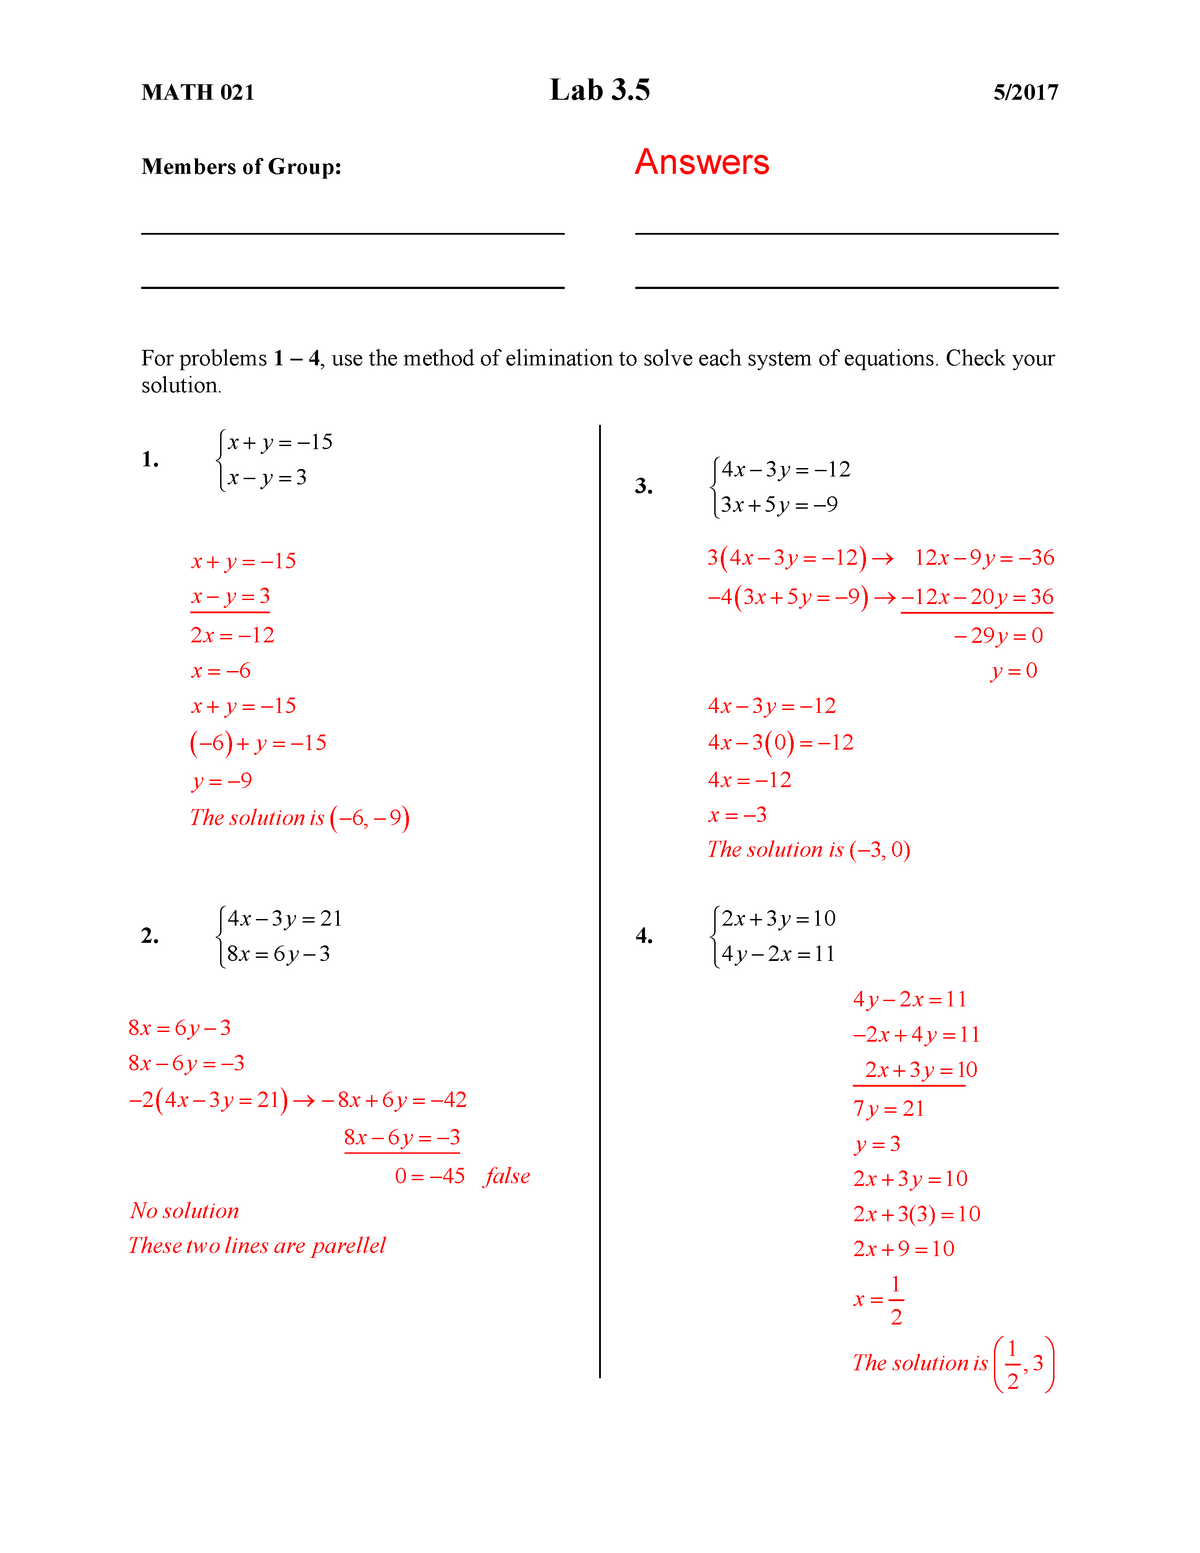 Lab 3 5 Answer Key Math 021 Lab 3 5 Members Of Group Answers For Problems 1 4 Use The Method Studocu